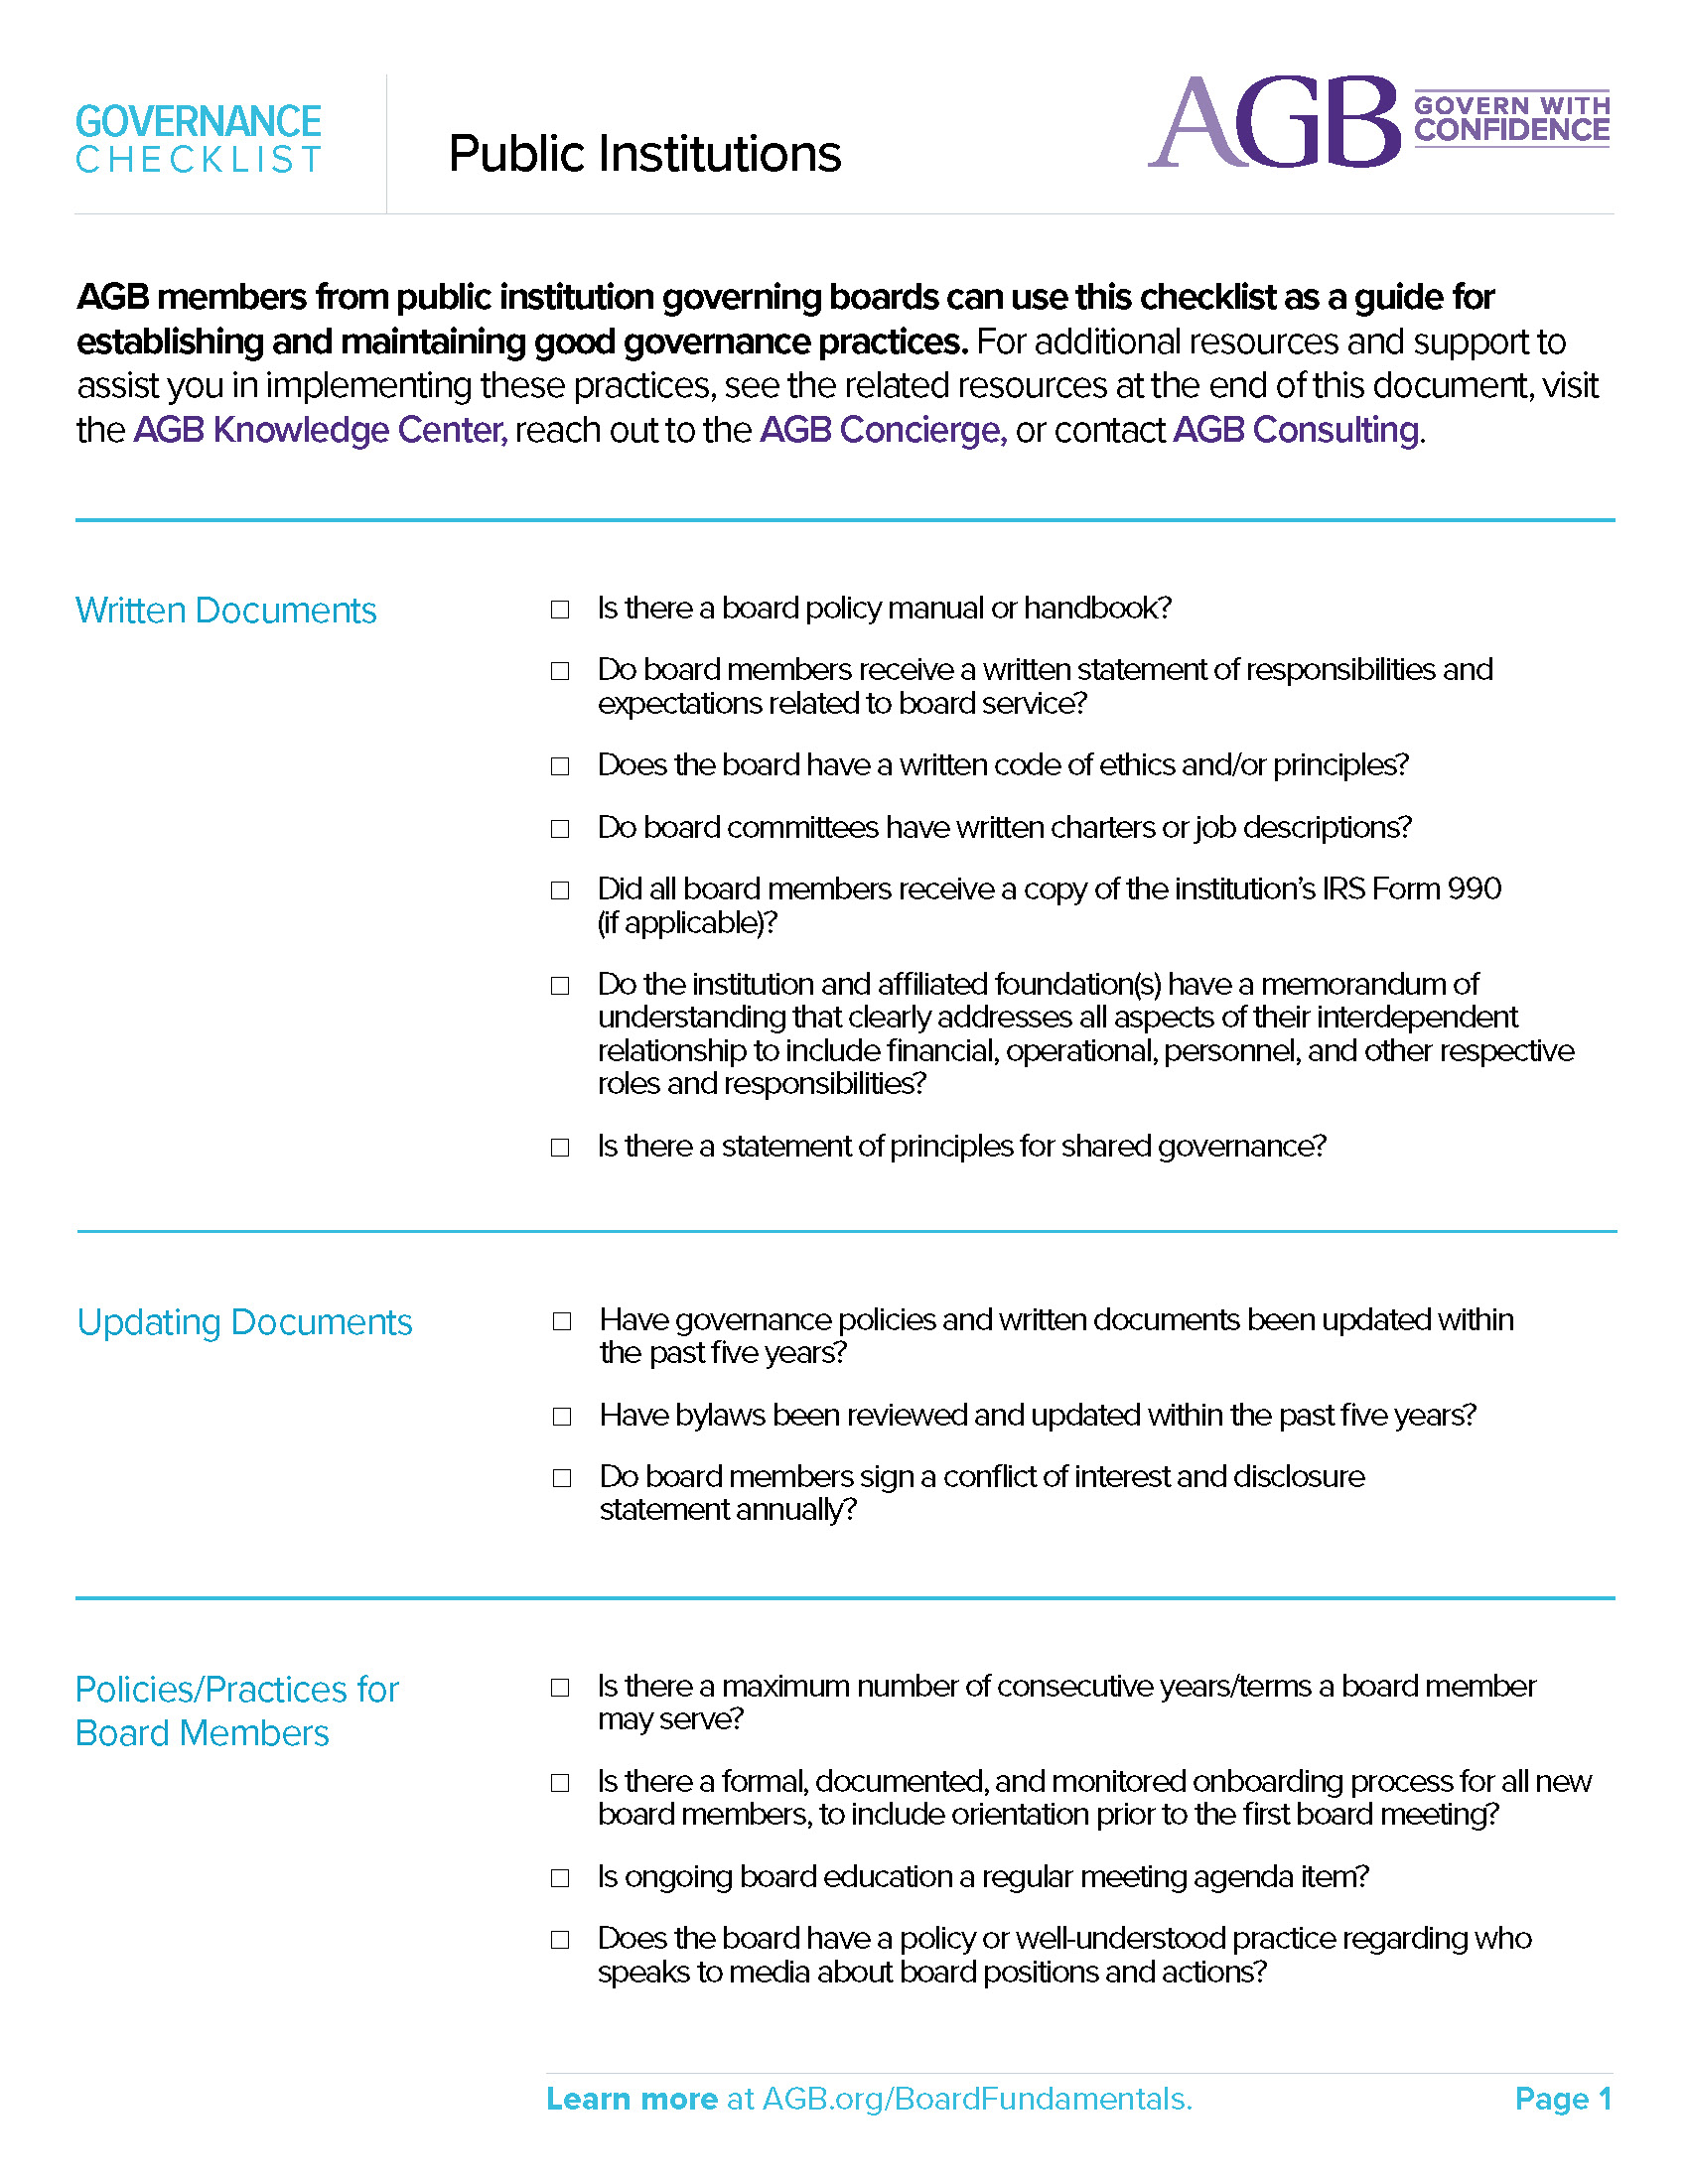 Higher Education Public Institutions Governance Checklist from AGB